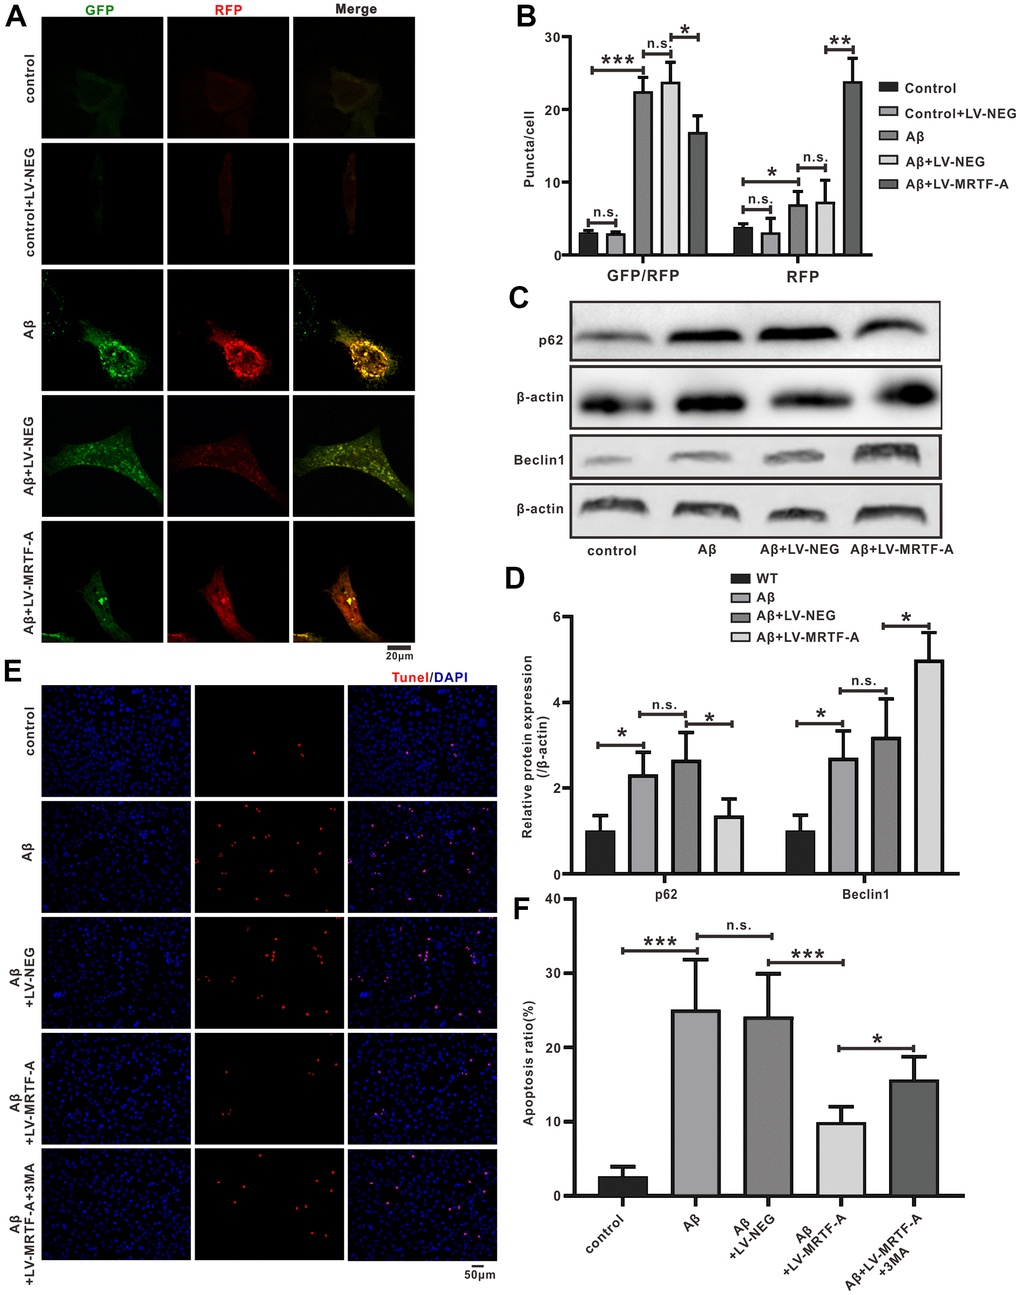 MRTF-A attenuated Aβ-induced neurotoxicity by promoting autophagy in SH-SY5Y cells. (A, B) The autophagy flux analysis using Ad-mCherry-GFP-LC3B-tagged protein. (C, D) Western blot analysis protein for Beclin1 and p62 expression. (E, F) TUNEL staining for cell apoptosis in Aβ-treated SH-SY5Y cells followed MRTF-A treatment co-incubation with or without 3-MA. Data represent means ± SEM of 3 independent experiments. *P P P 